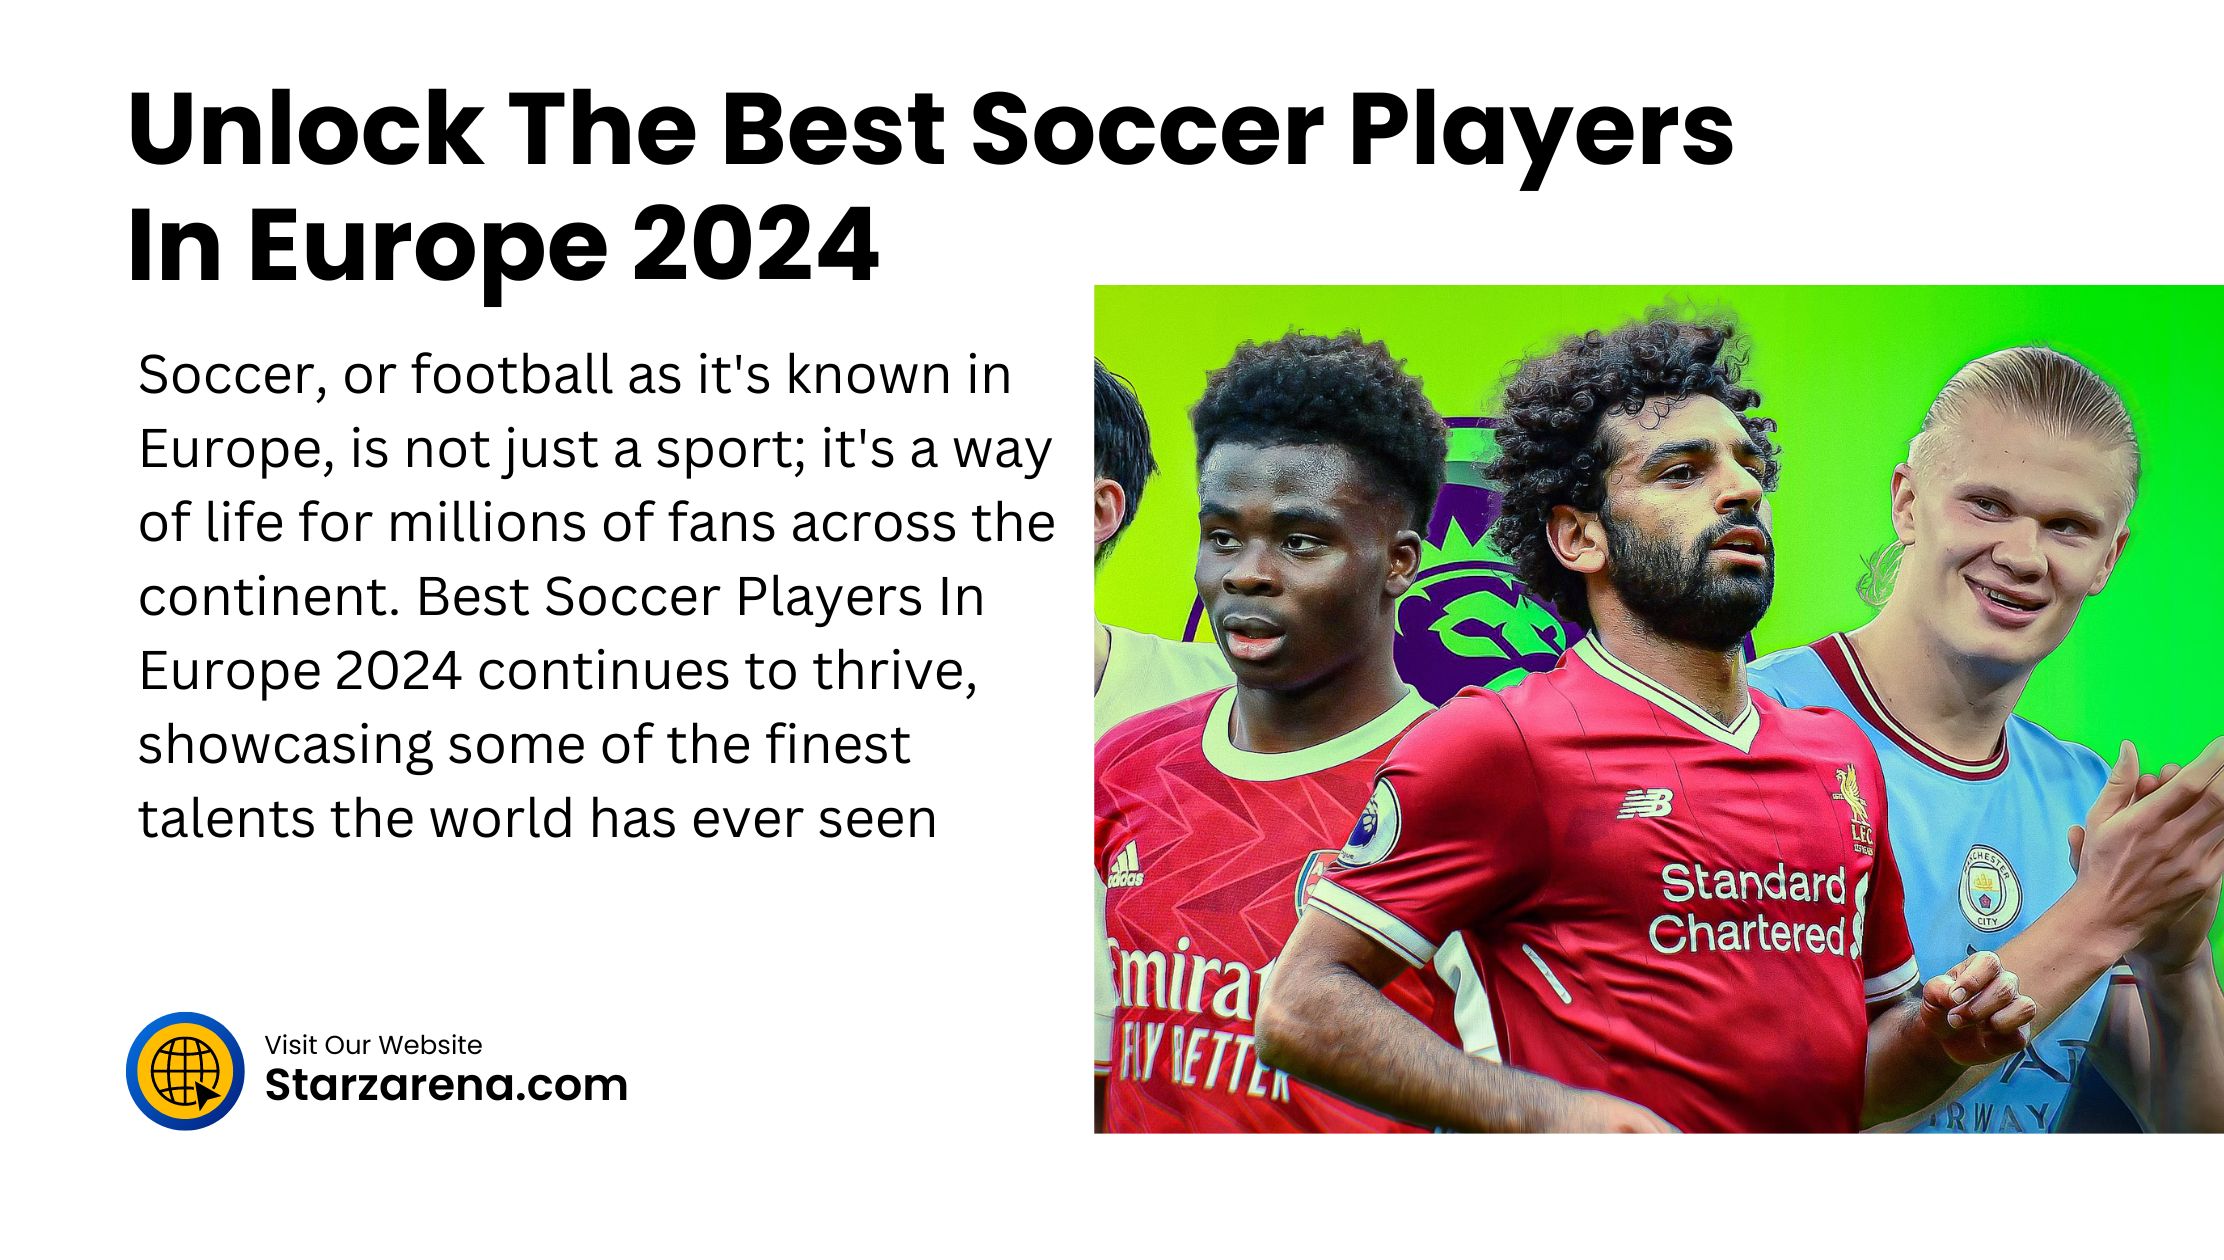 Unlock The Best Soccer Players In Europe 2024